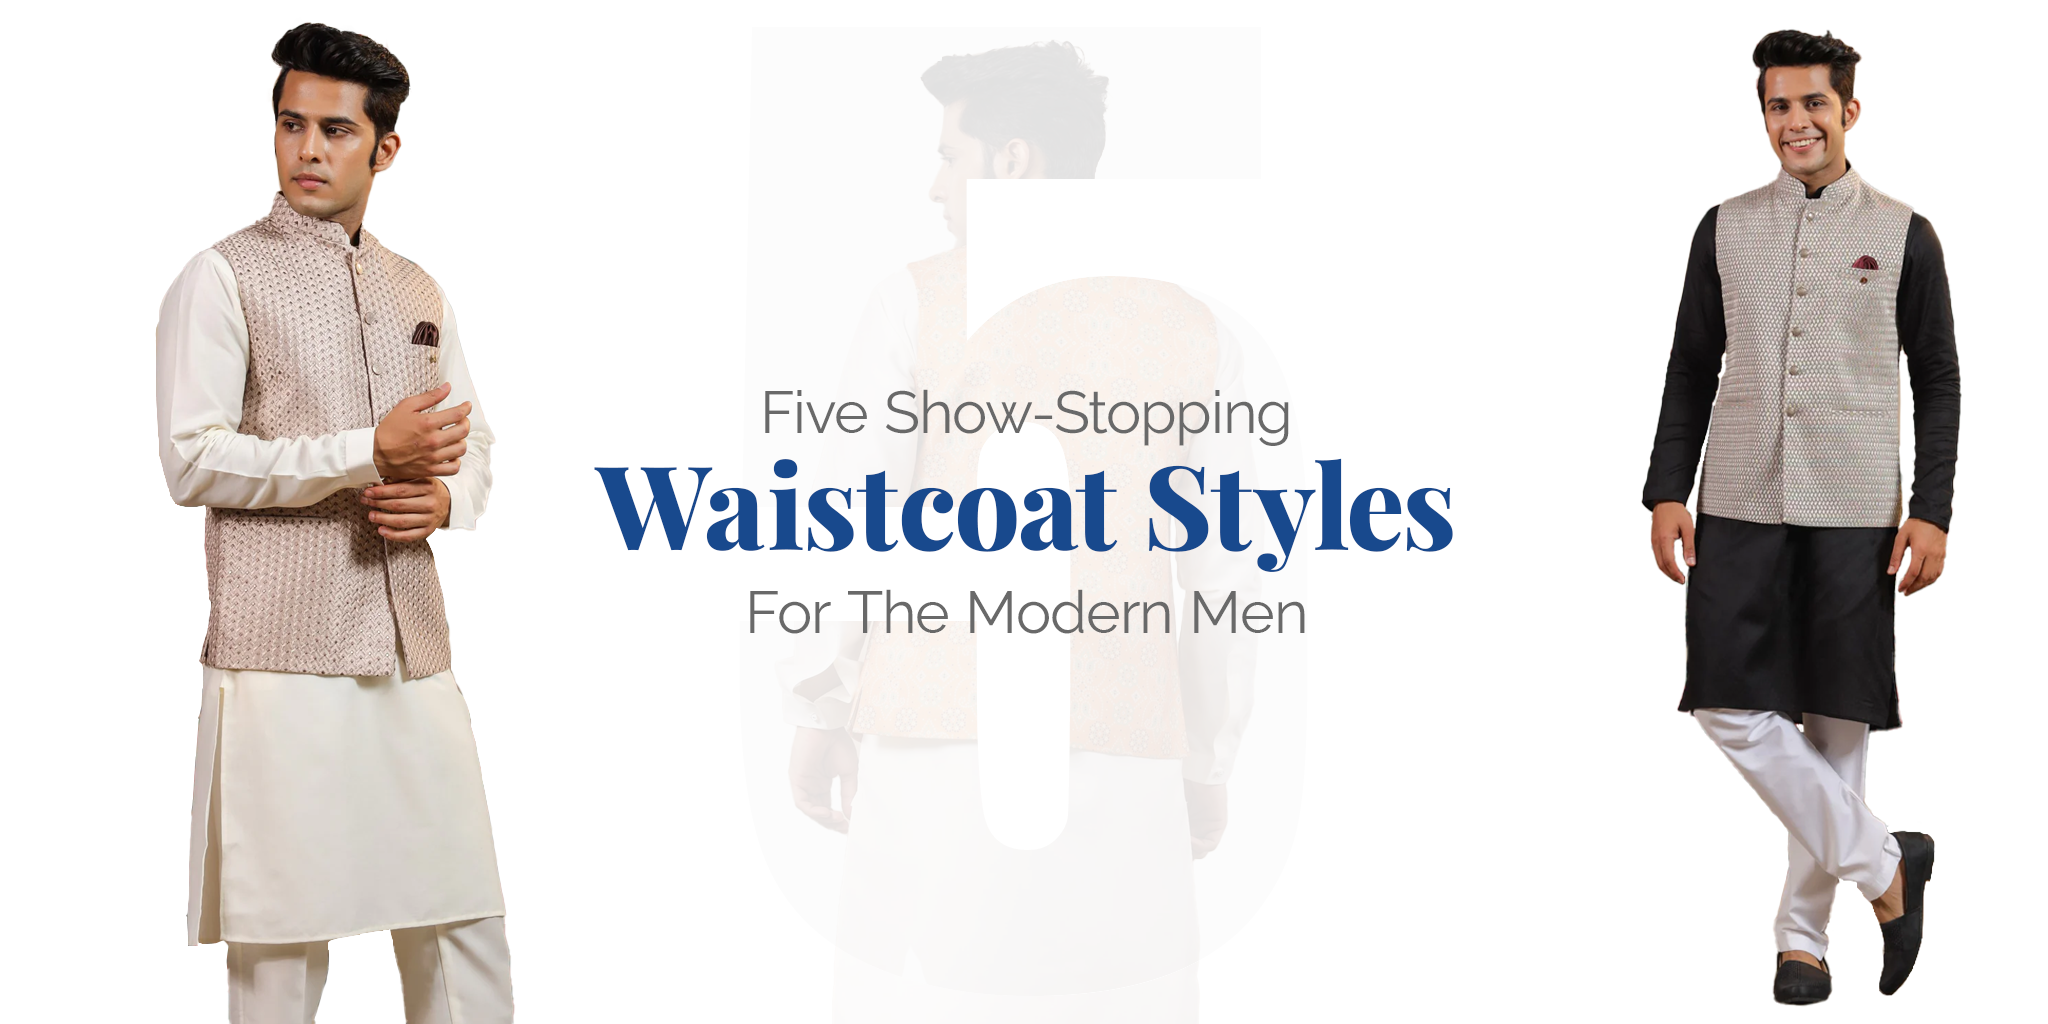 Five Show-Stopping Waistcoat Styles For The Modern Men